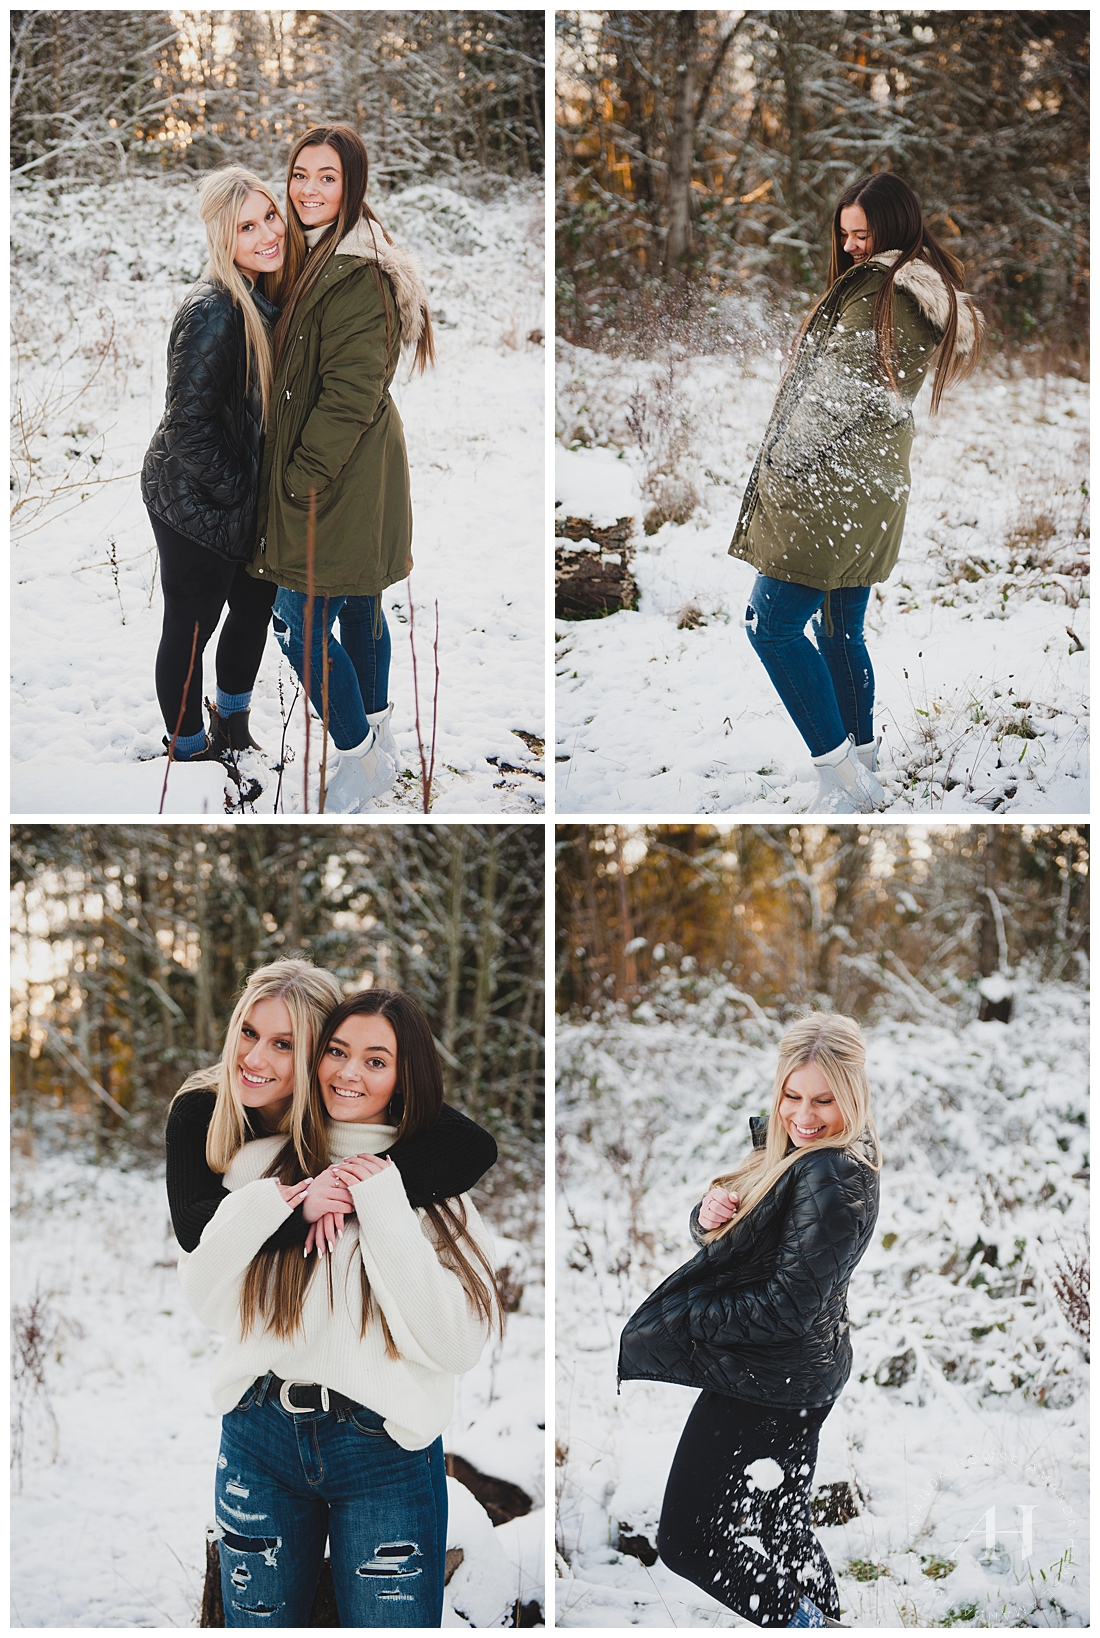 Snowball Fight Portraits | Best Friends in the Snow, Pose Ideas for High School Senior Girls, How to Style a Winter Shoot | Photographed by the Best Tacoma Senior Photographer Amanda Howse